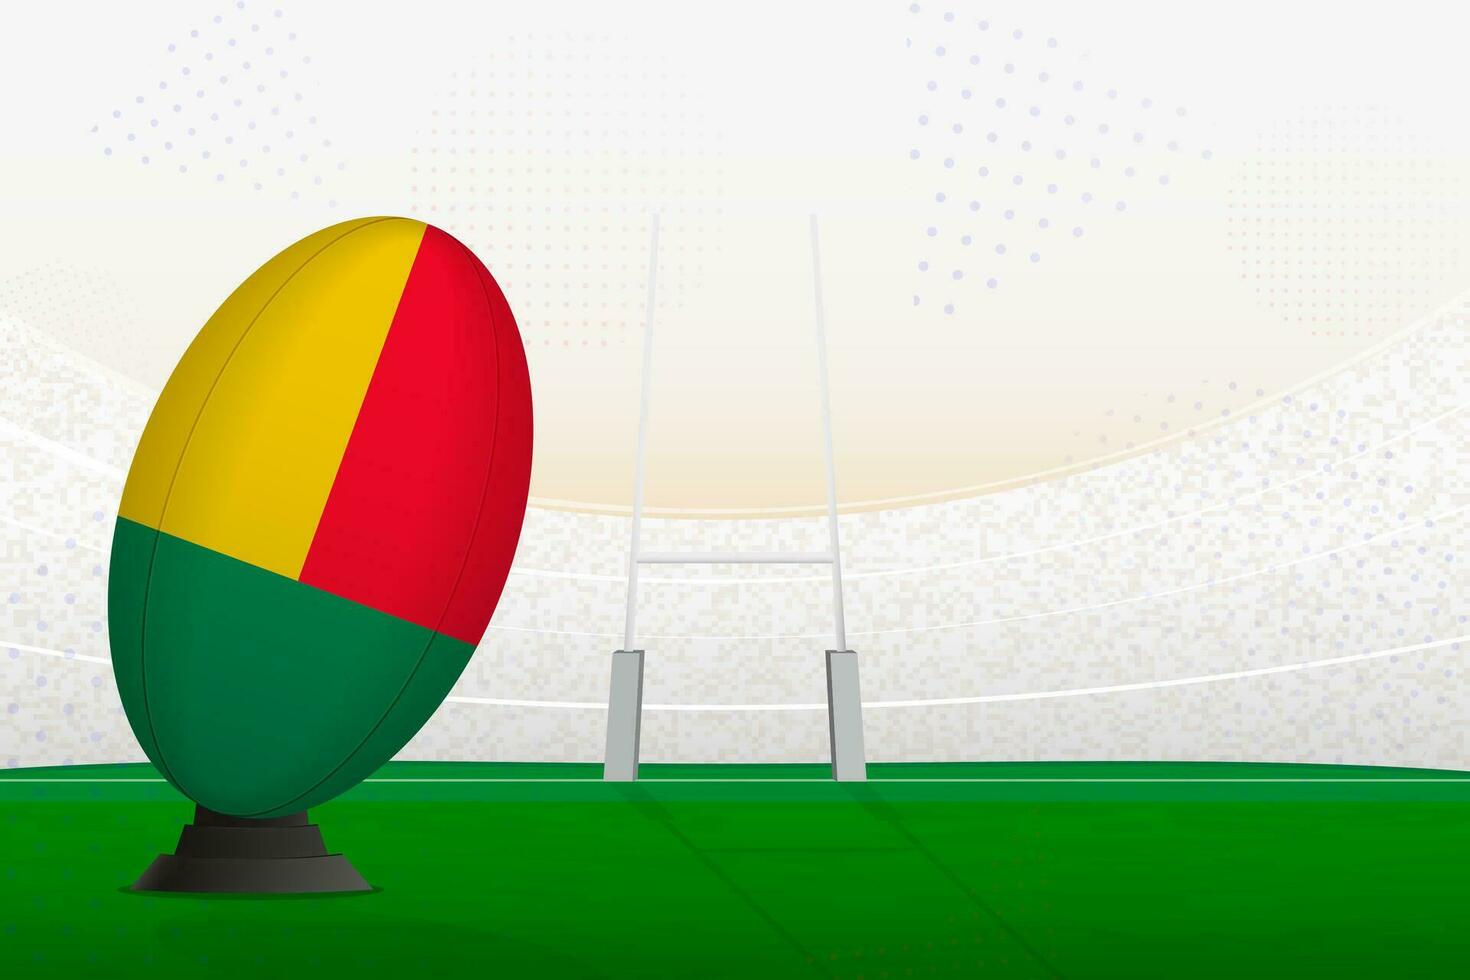 Benin national team rugby ball on rugby stadium and goal posts, preparing for a penalty or free kick. vector